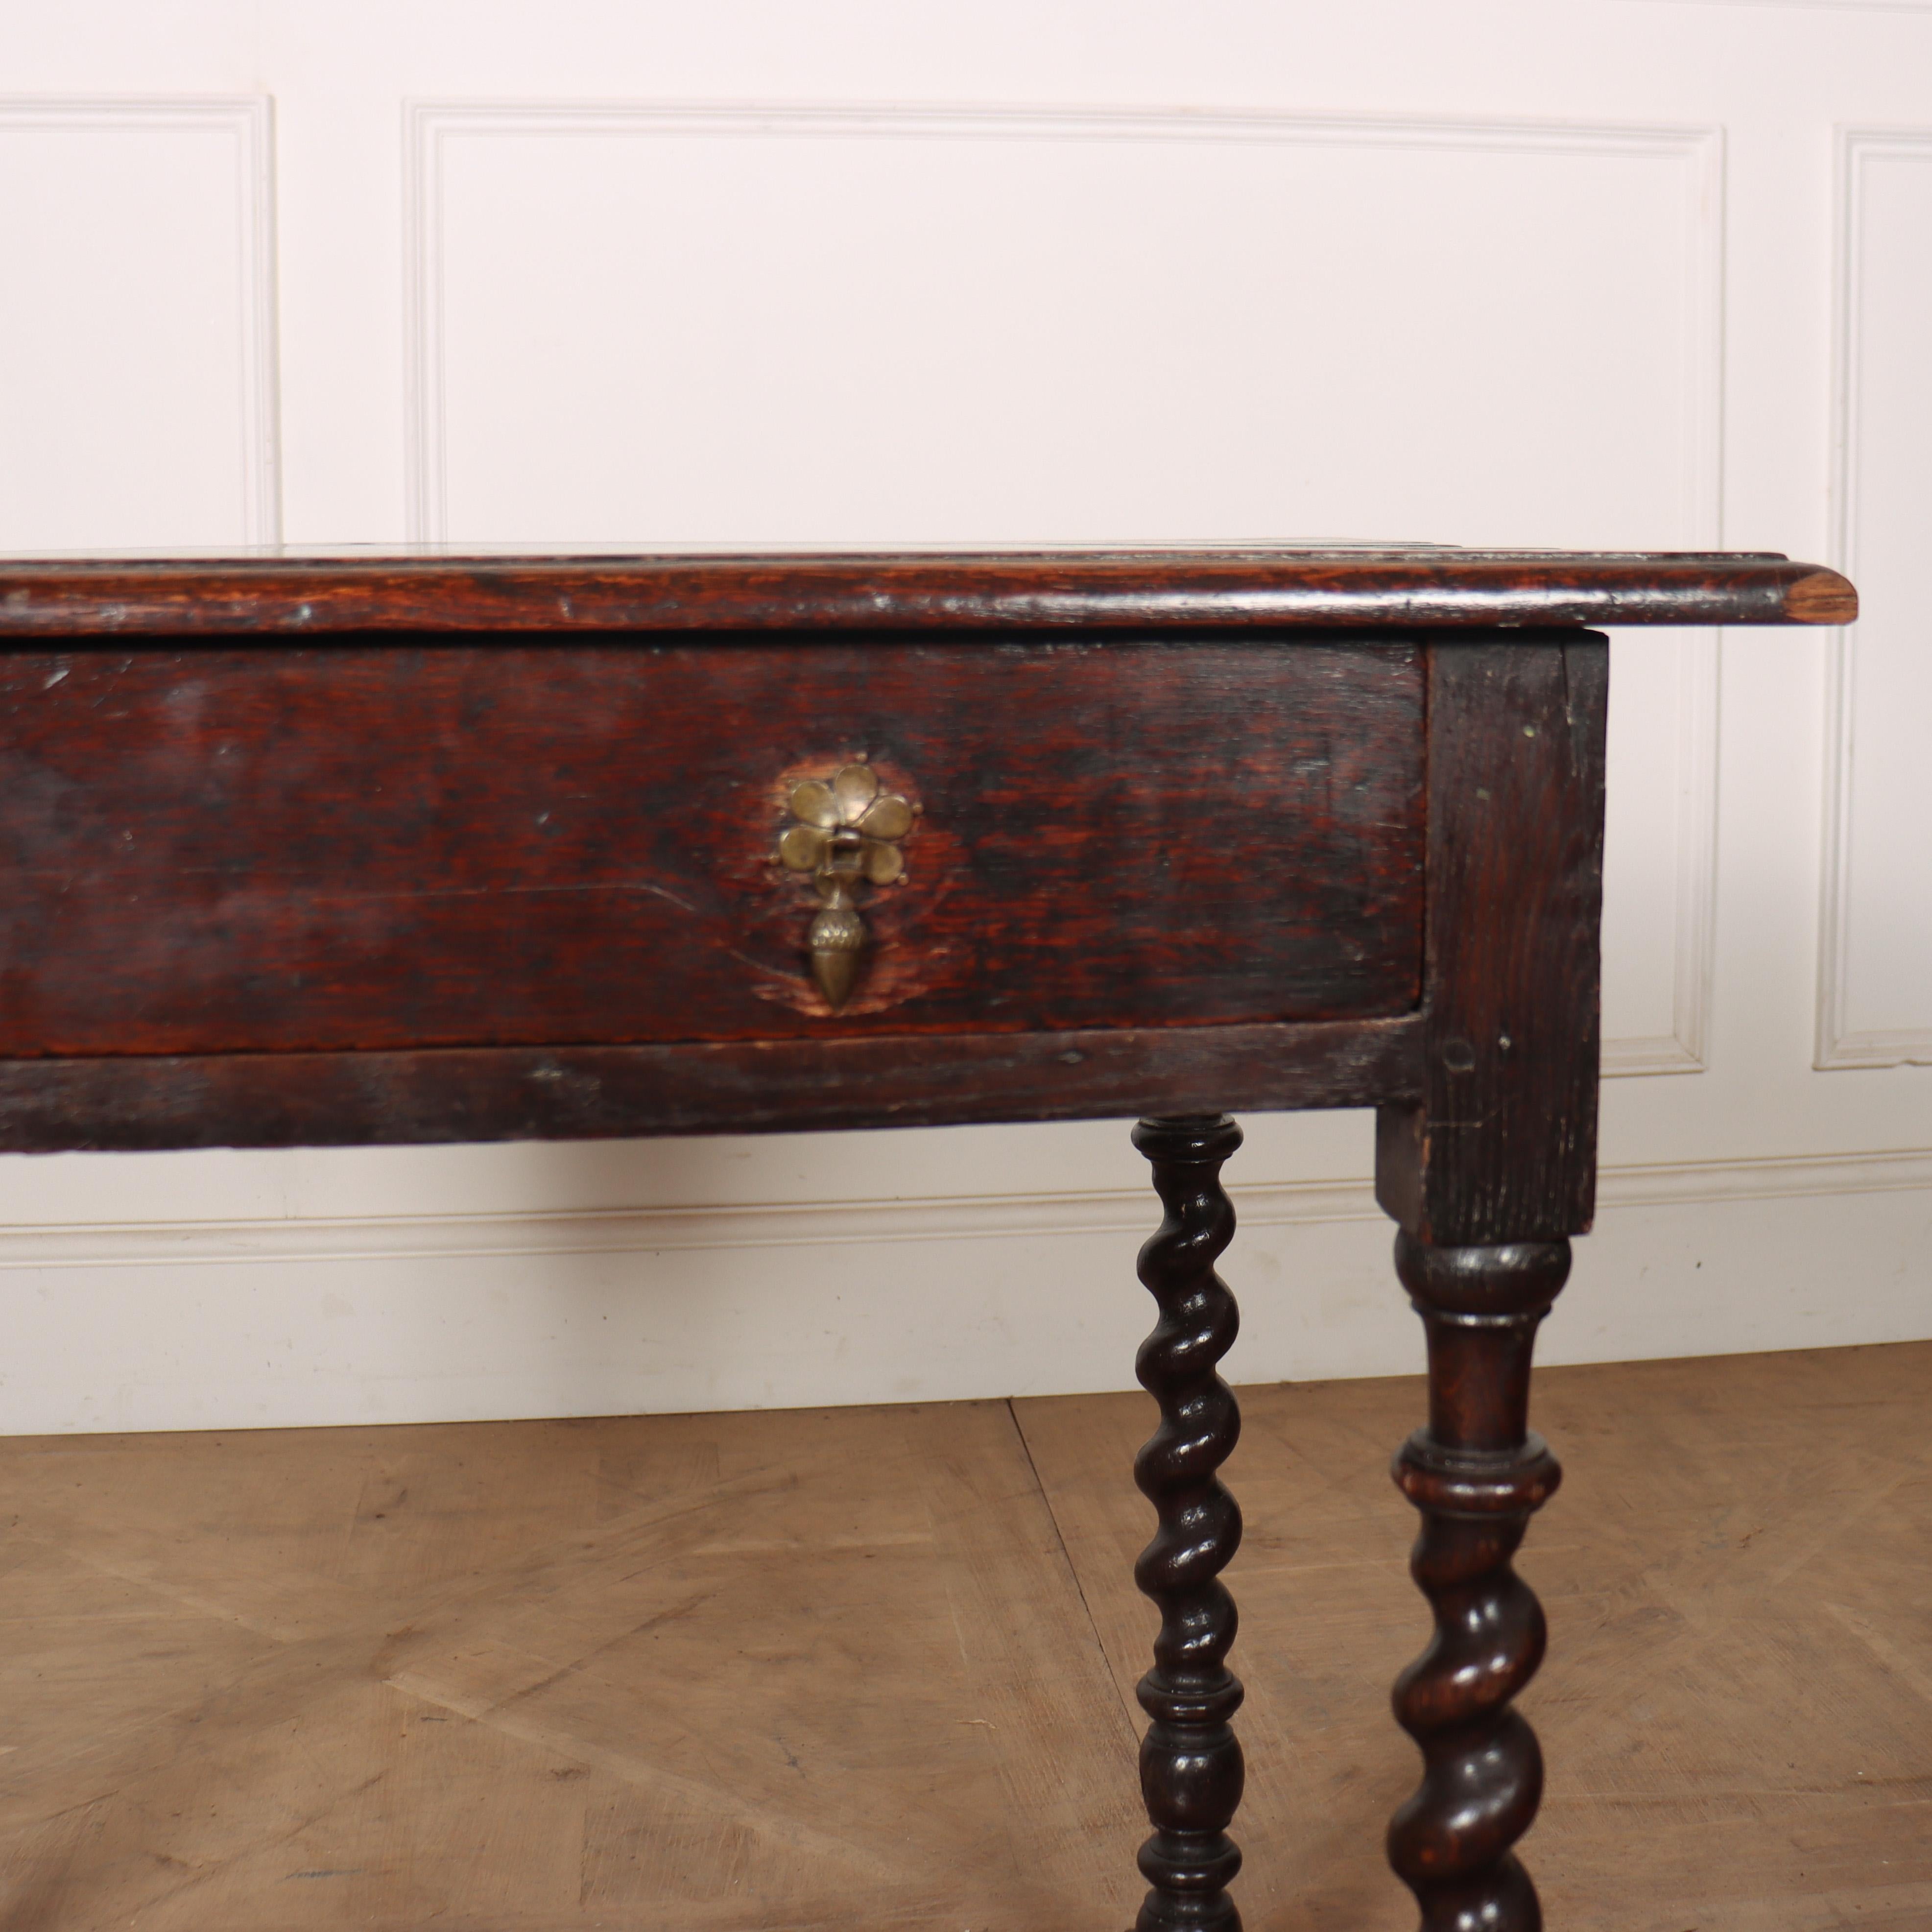 18th C English oak 1 drawer lamp table with barley twist legs. Lovely colour. 1760

Reference: 8205

Dimensions
33 inches (84 cms) Wide
20 inches (51 cms) Deep
29 inches (74 cms) High